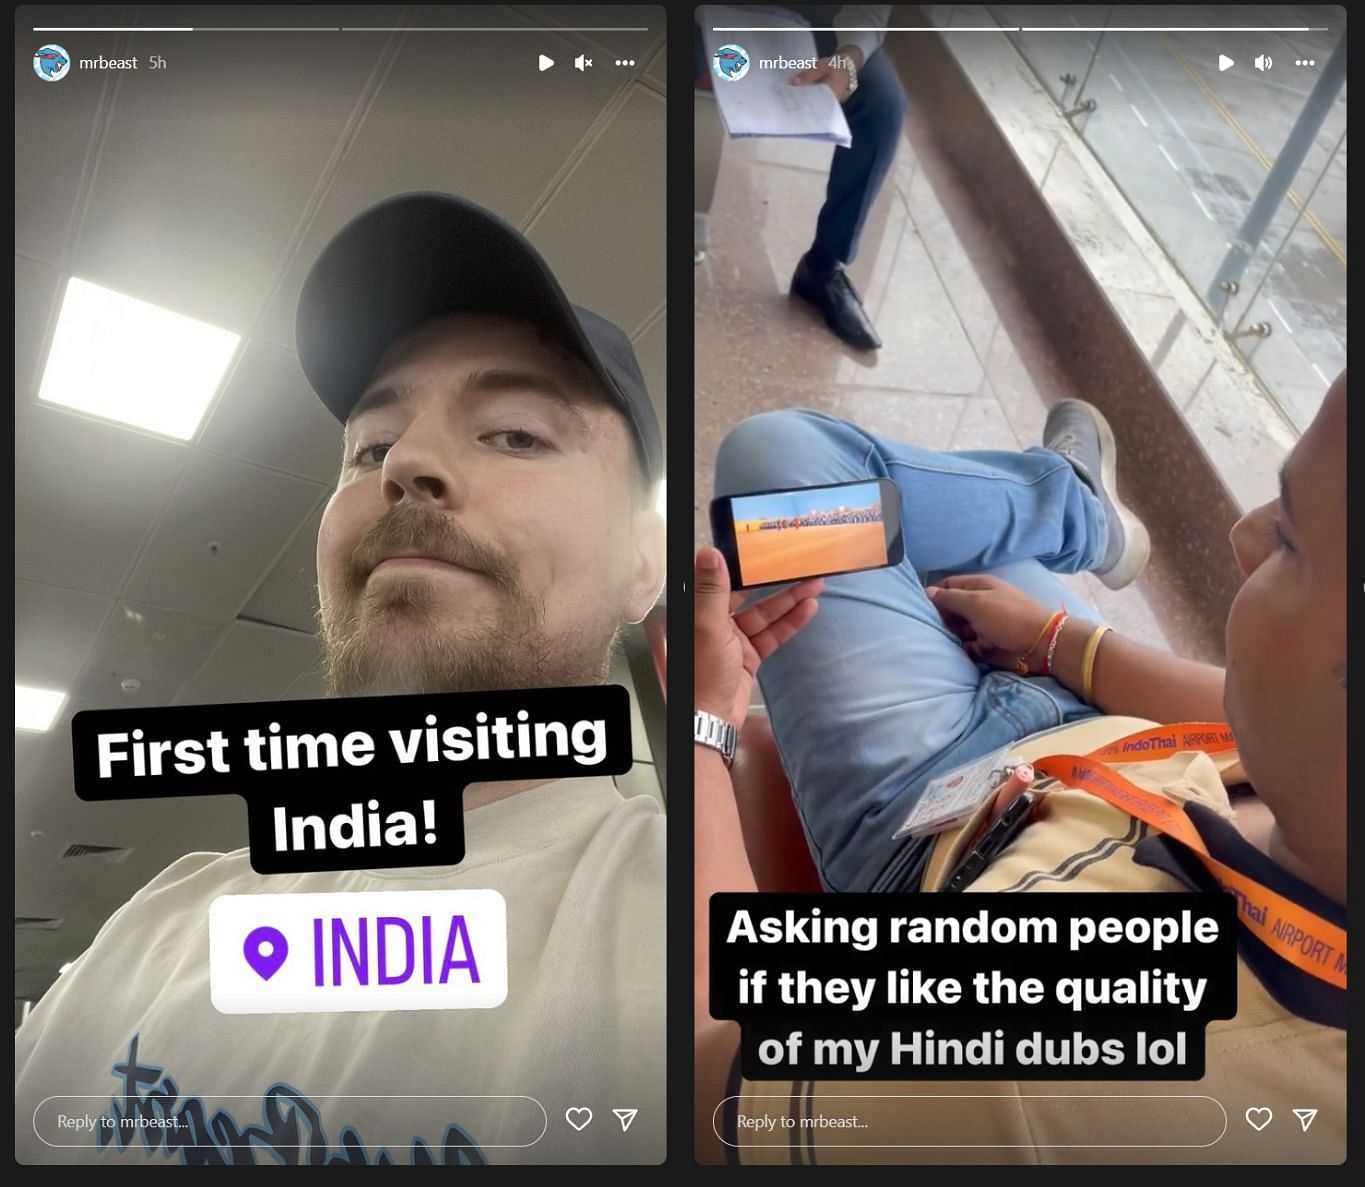 MrBeast posts two Instagram stories revealing that he is visiting India (Images via Instagram Stories)